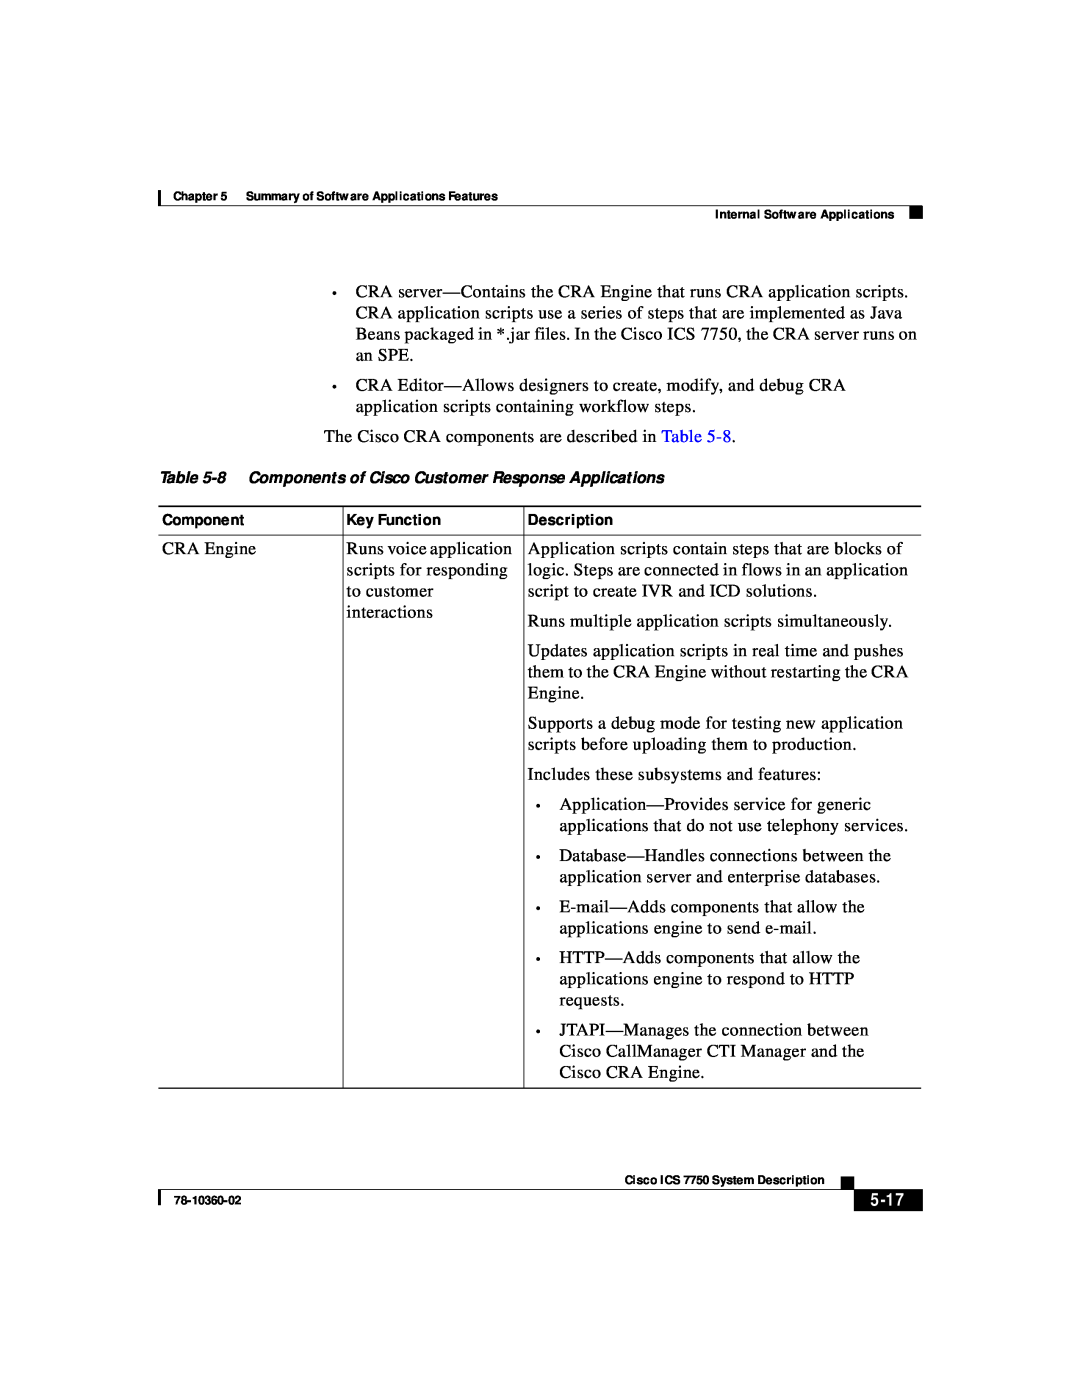 Cisco Systems ICS-7750 manual The Cisco CRA components are described in Table, 5-17 